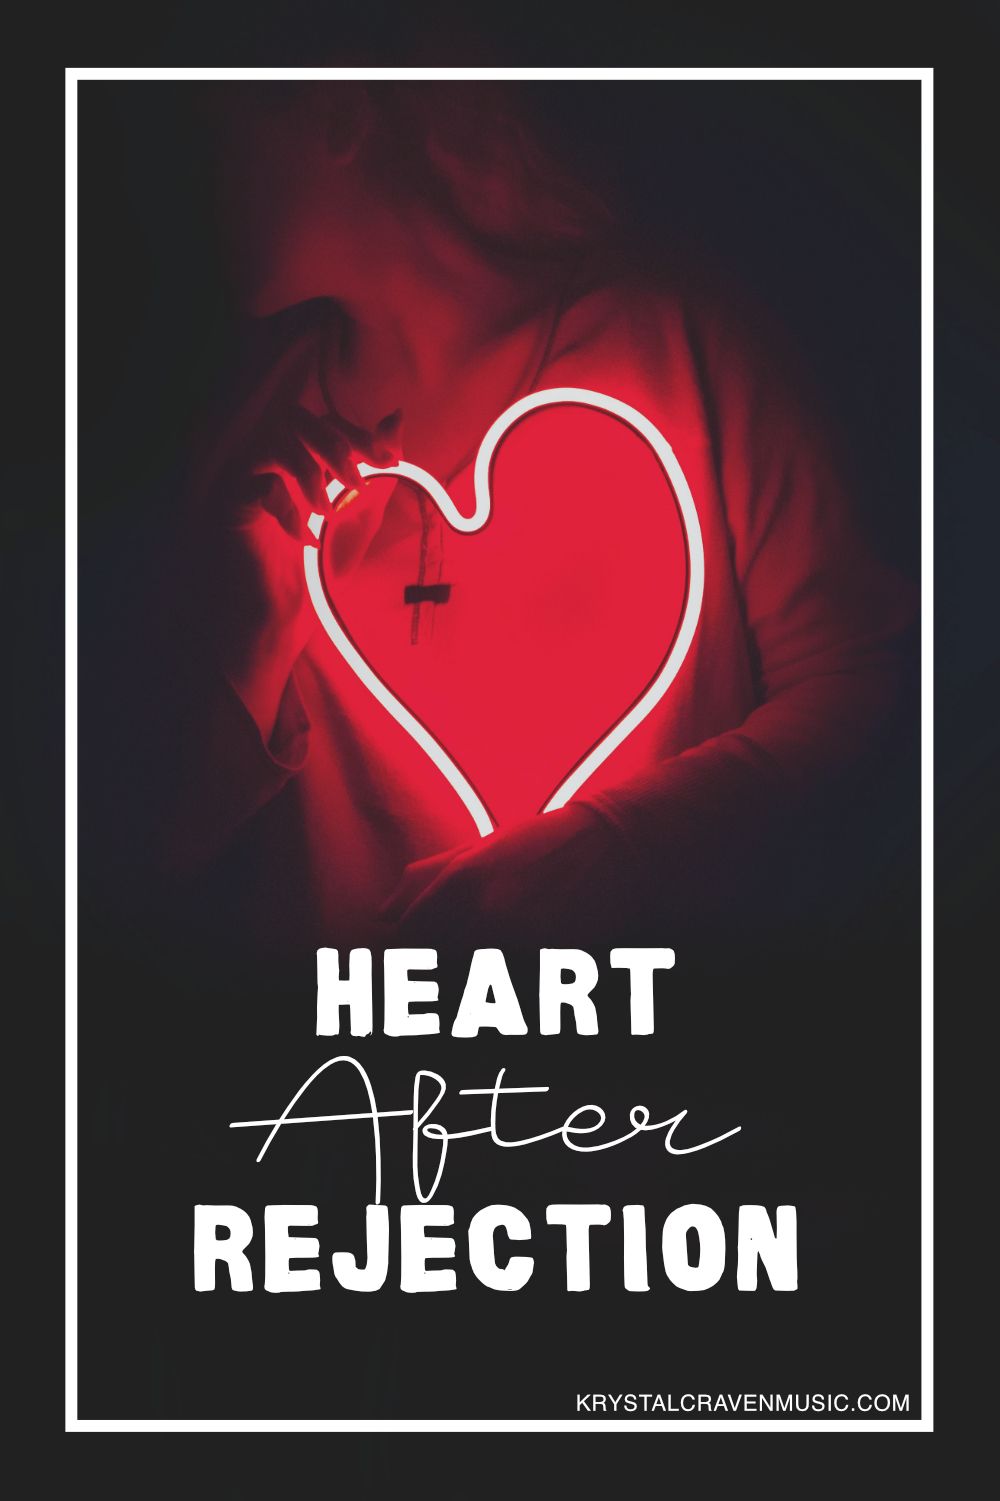 The title text "Heart After Rejection" in a large white font overlaying a woman in a dark room holding a large neon red heart.